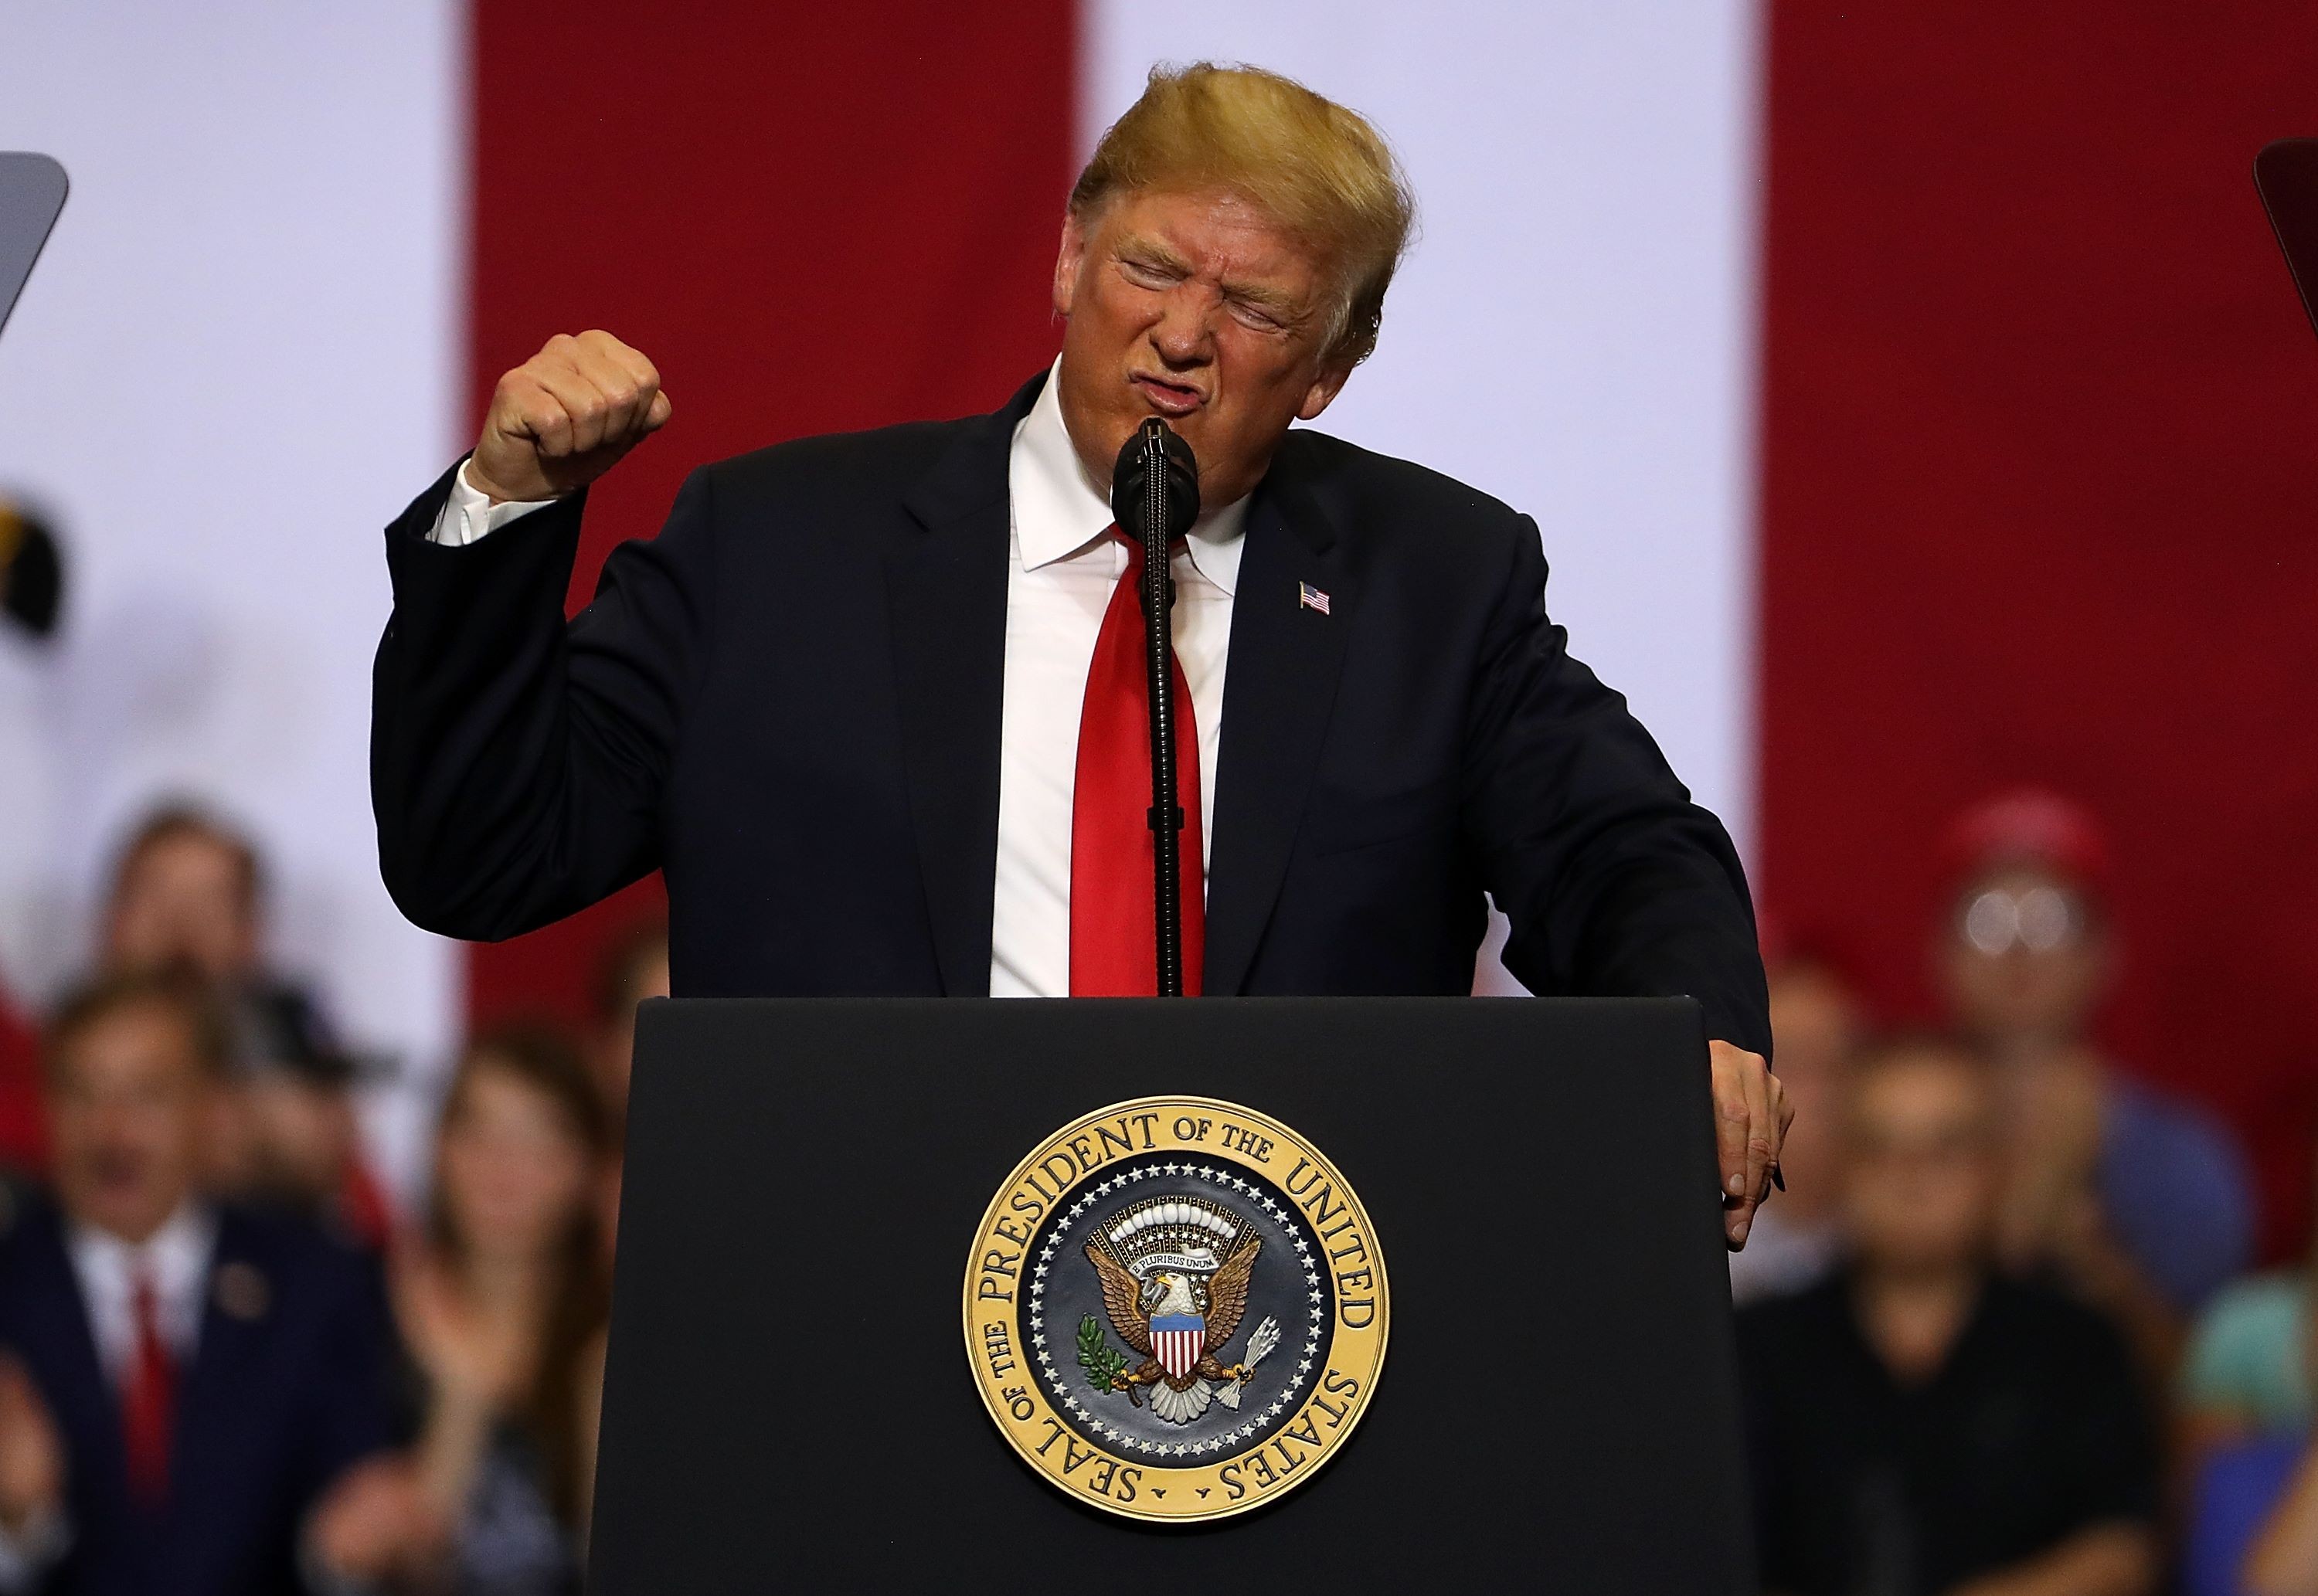 US President Donald Trump speaks to supporters during a campaign rally at Scheels Arena on June 27 in Fargo, North Dakota. Photo: Getty Images/AFP